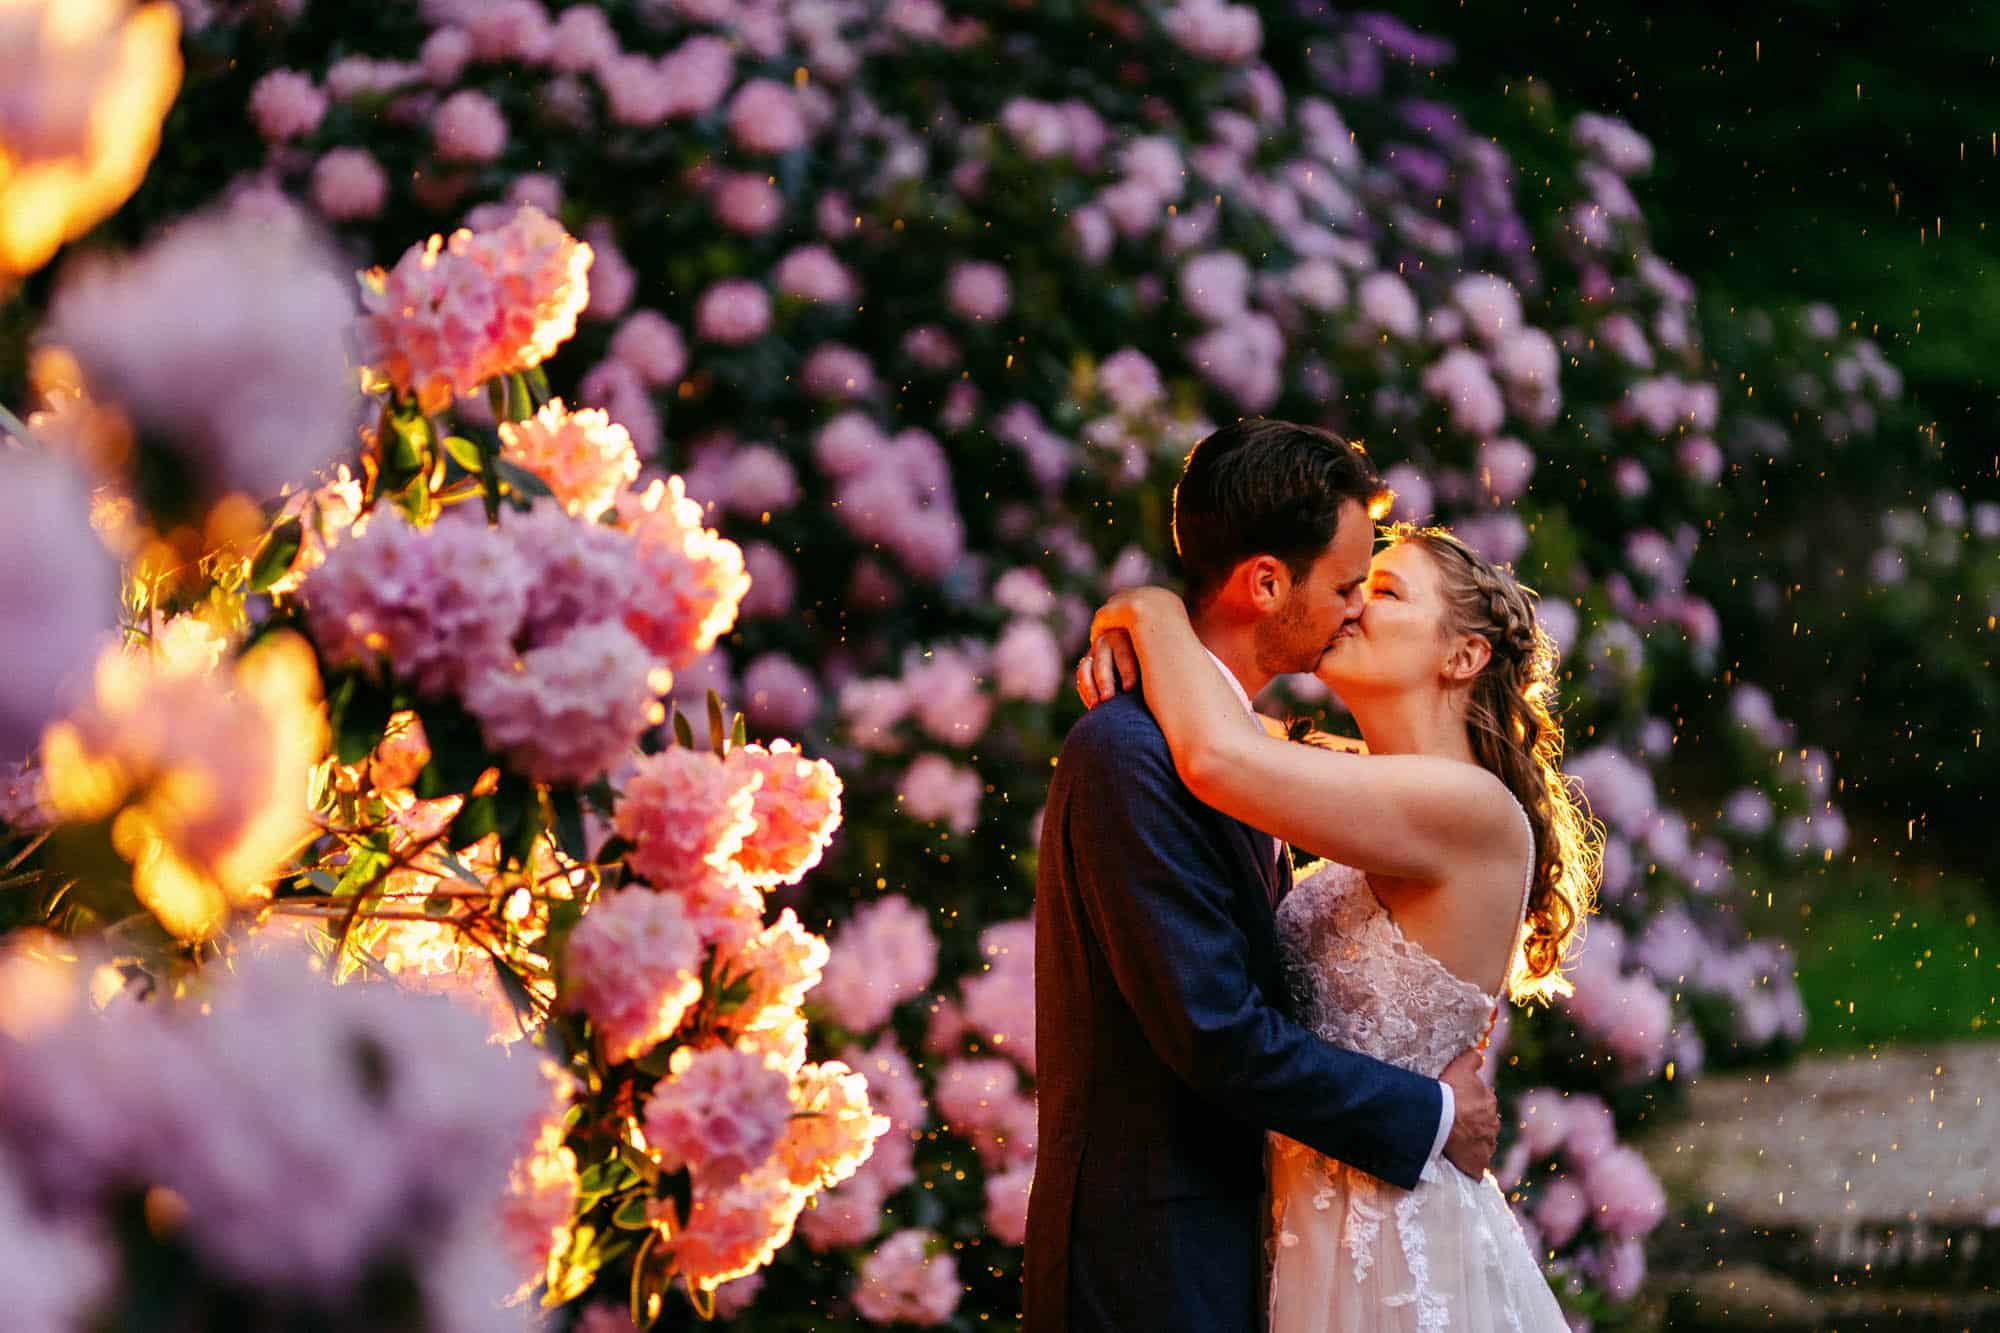 A bride and groom share a romantic kiss amid a vibrant floral display at their wedding, set against the backdrop of Rain at Your Wedding.